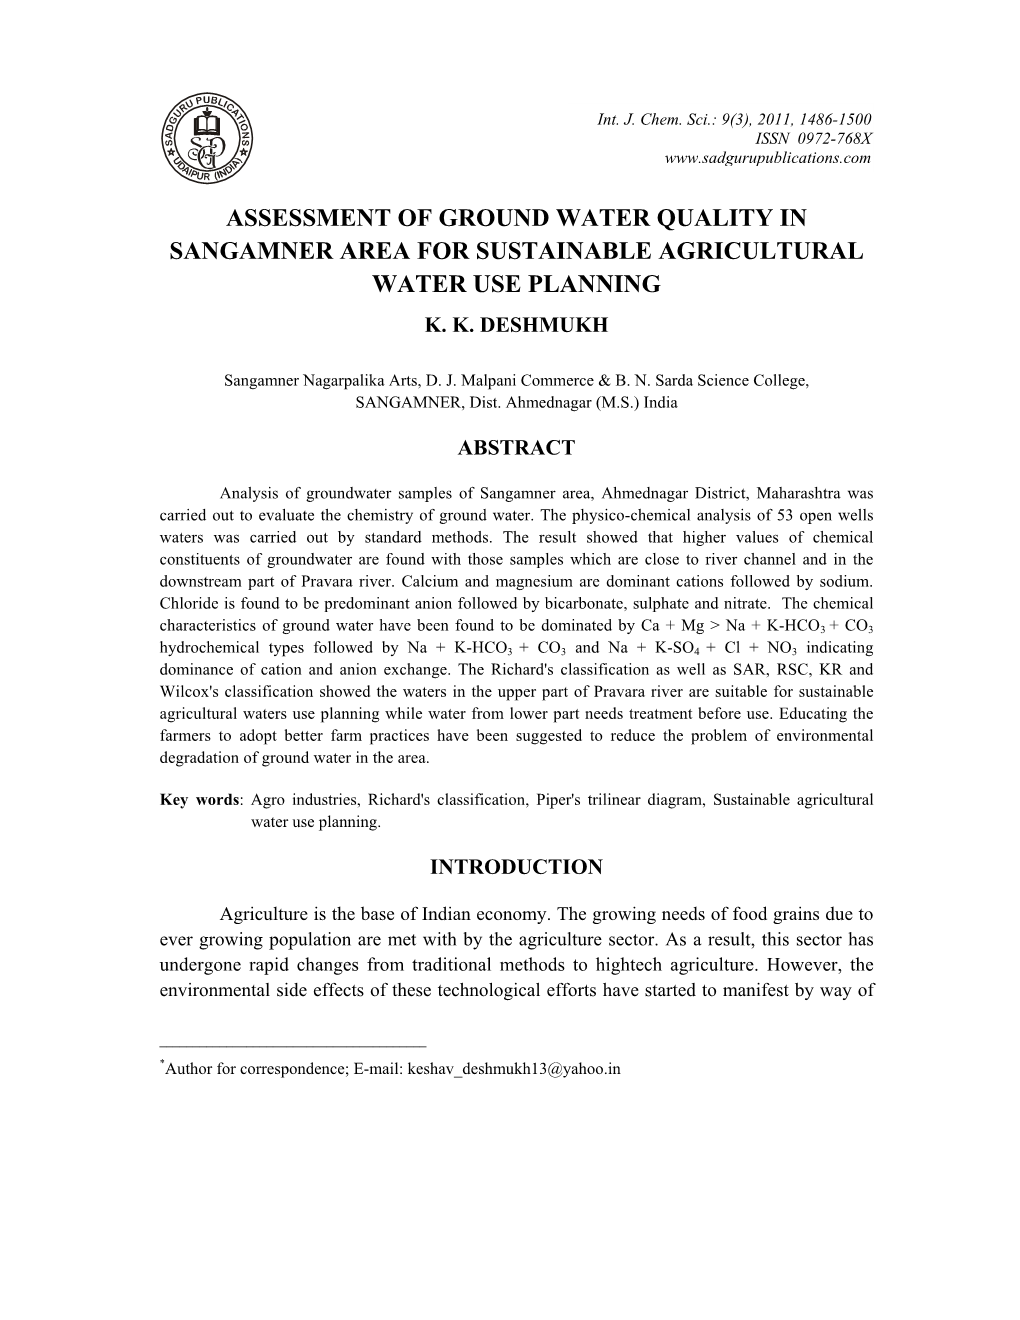 Assessment of Ground Water Quality in Sangamner Area for Sustainable Agricultural Water Use Planning K